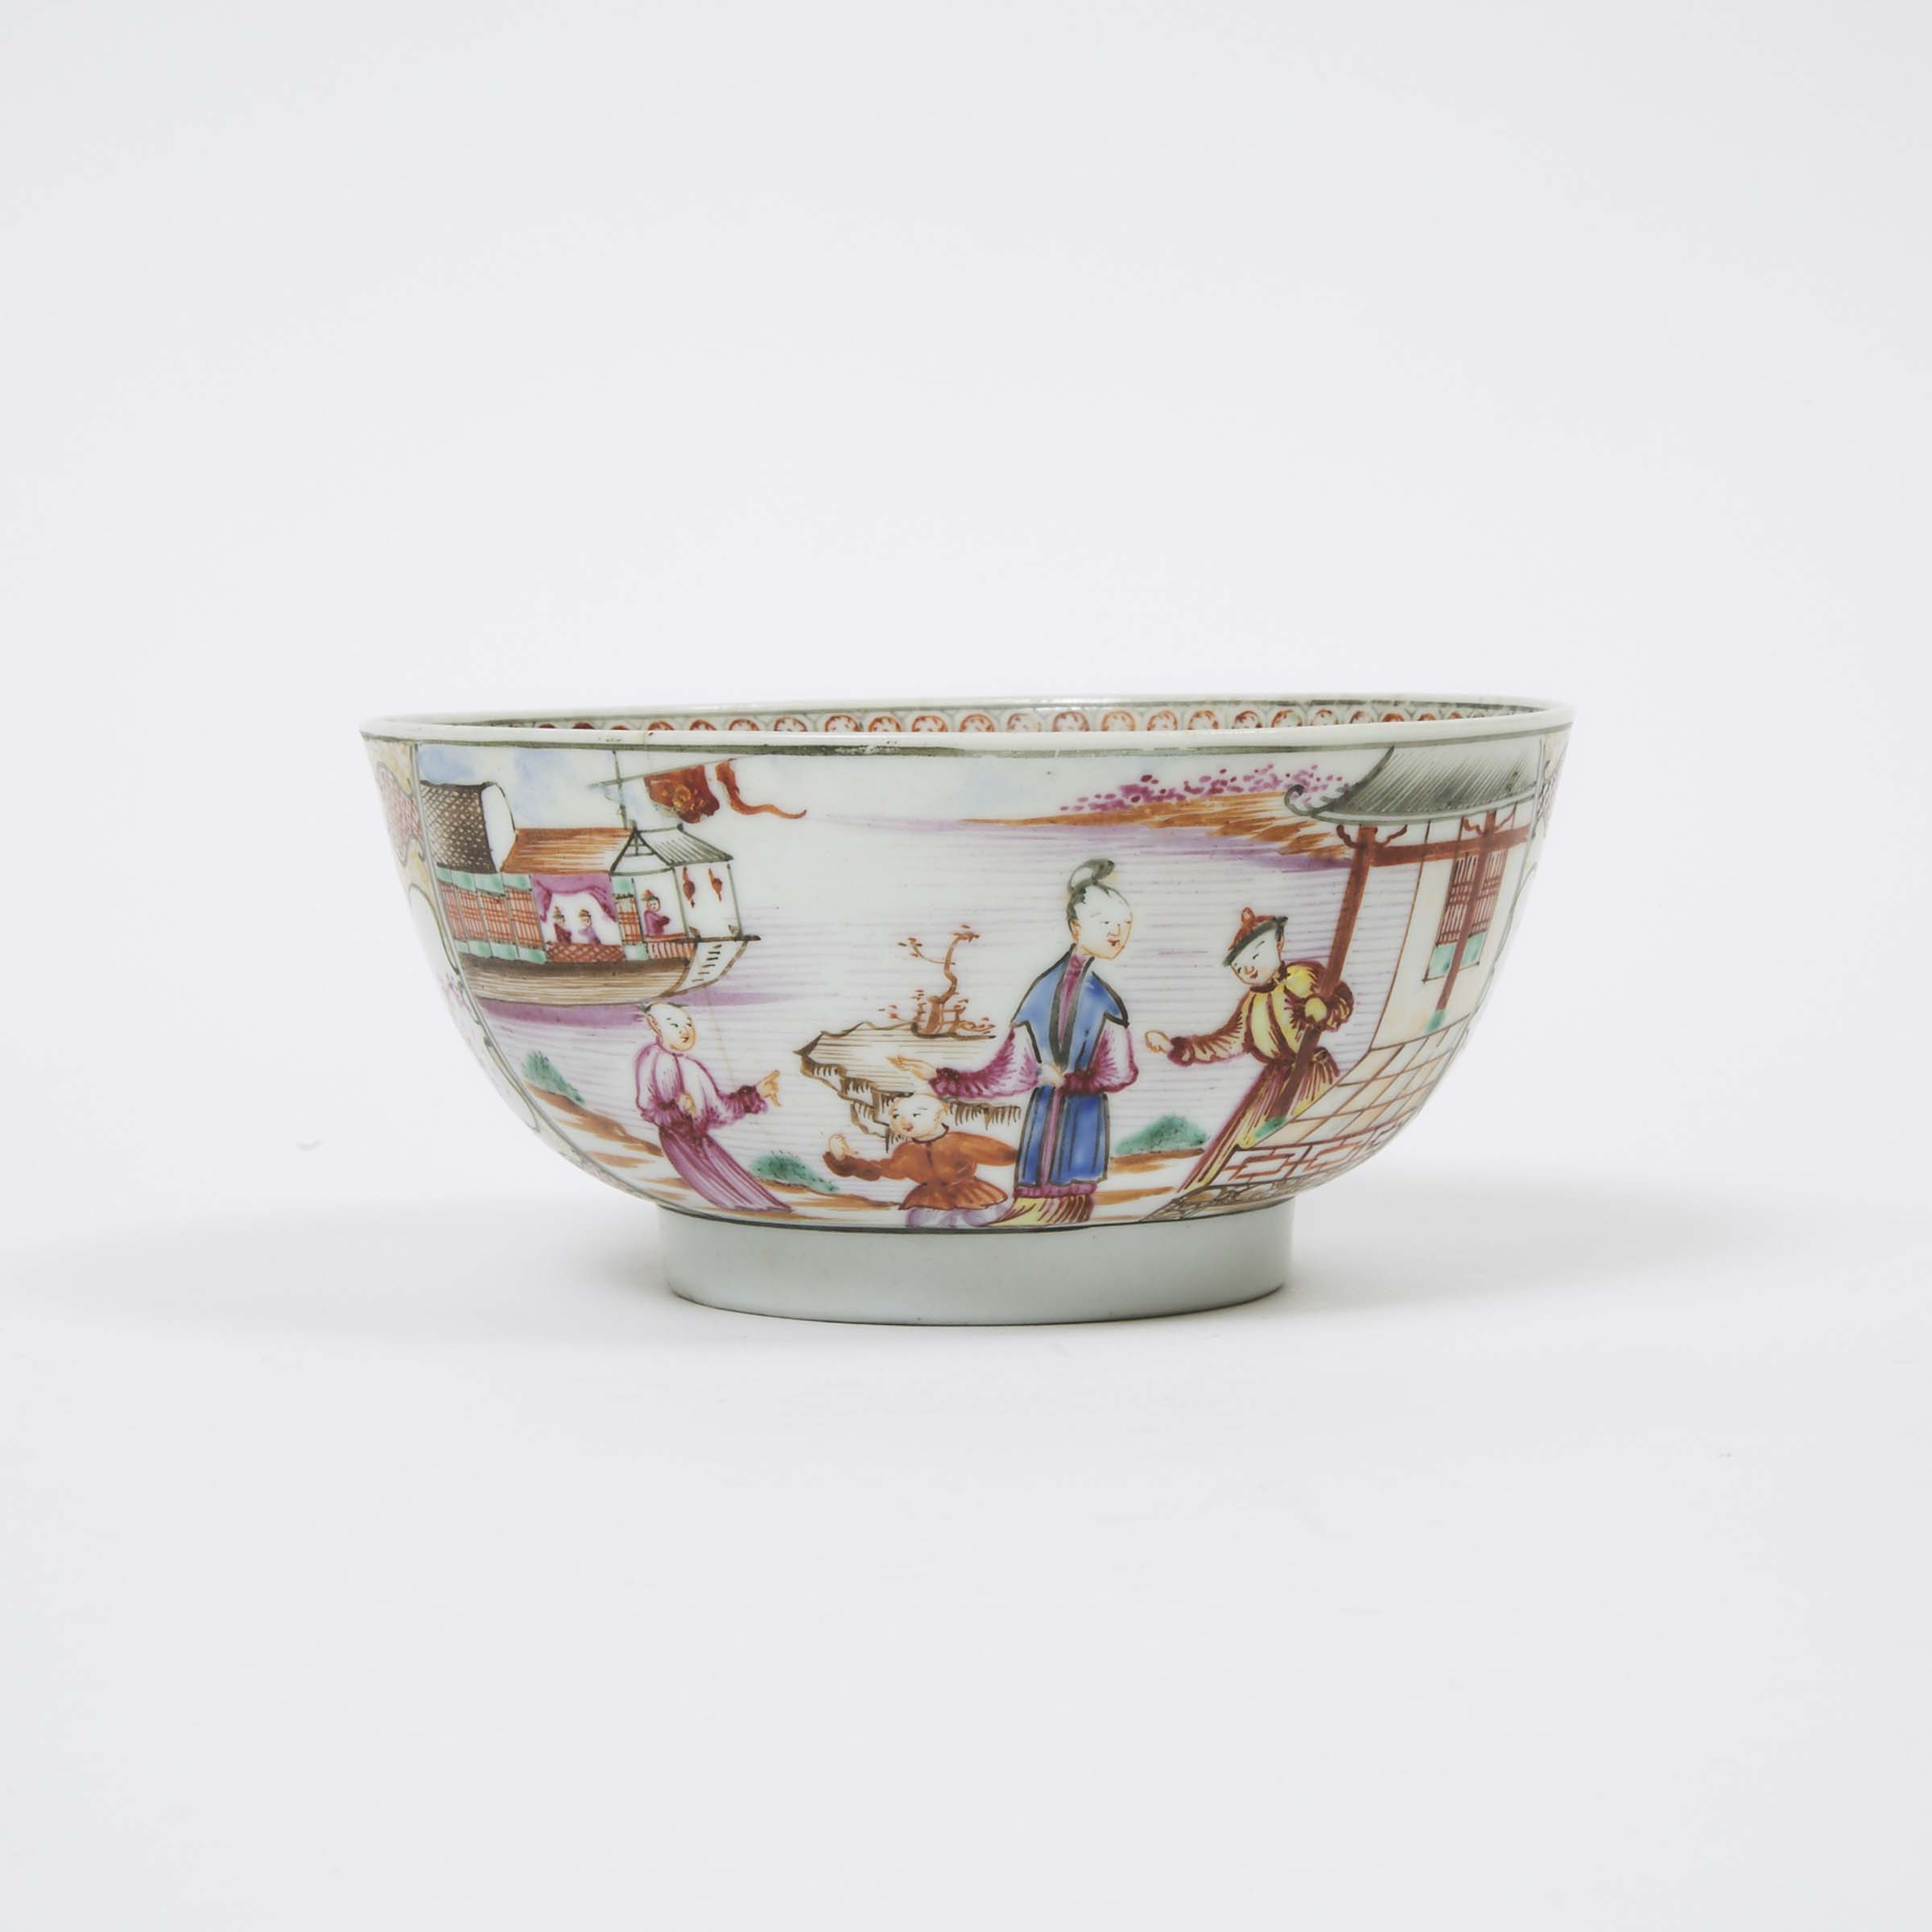 A Chinese Export Porcelain Bowl, 18th Century